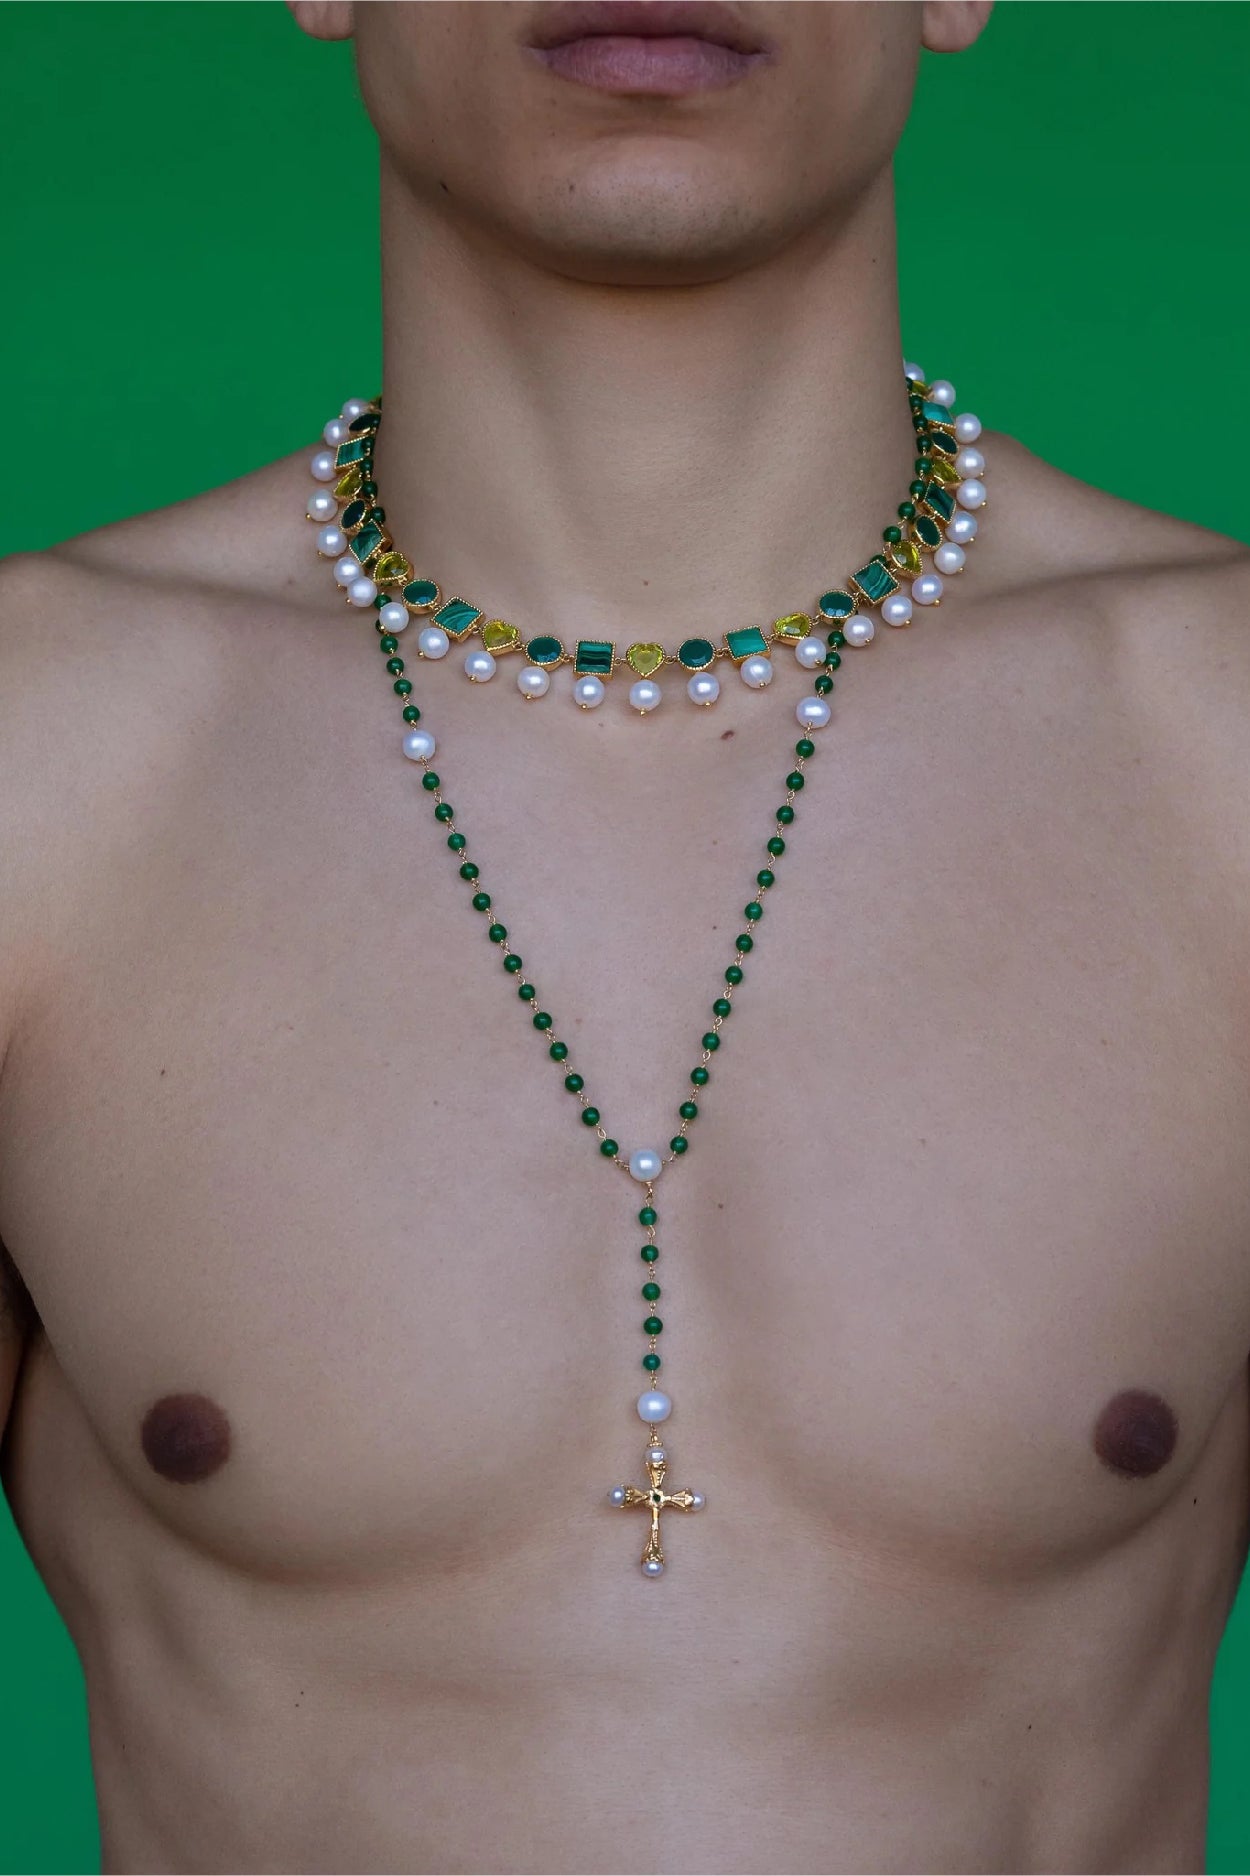 The Green Pearl Shape Necklace